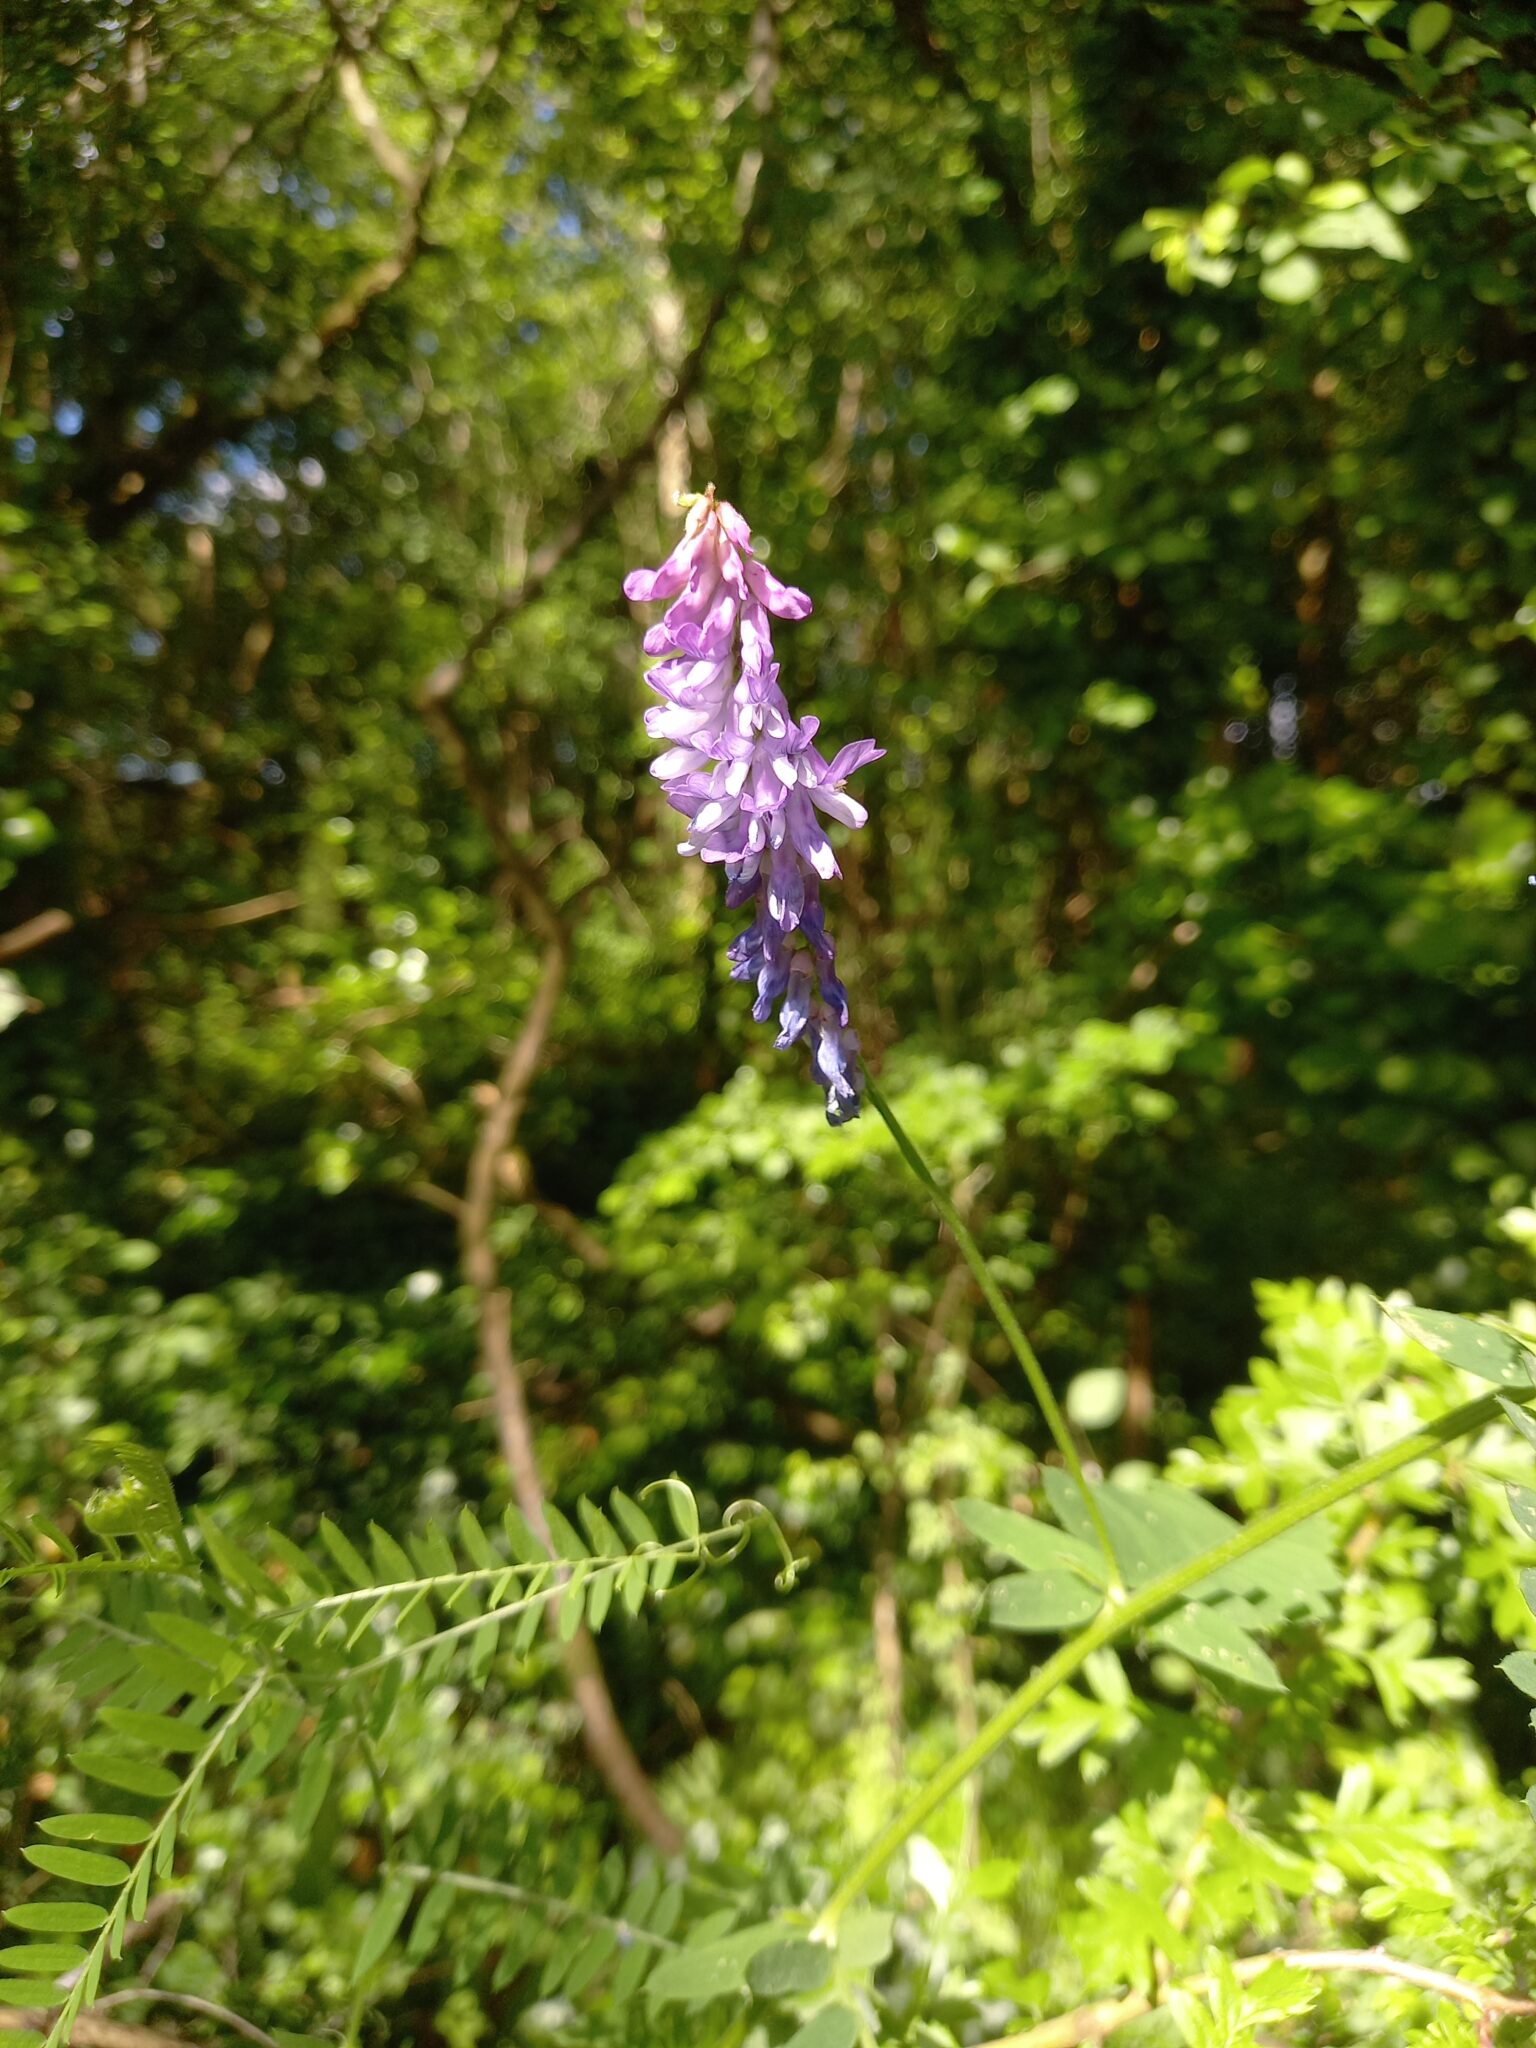 Tufted vetch, a flower with pinky-purple tube shapes that turn up into a hood at the end and grow in dense clusters along one side of the flower spike.